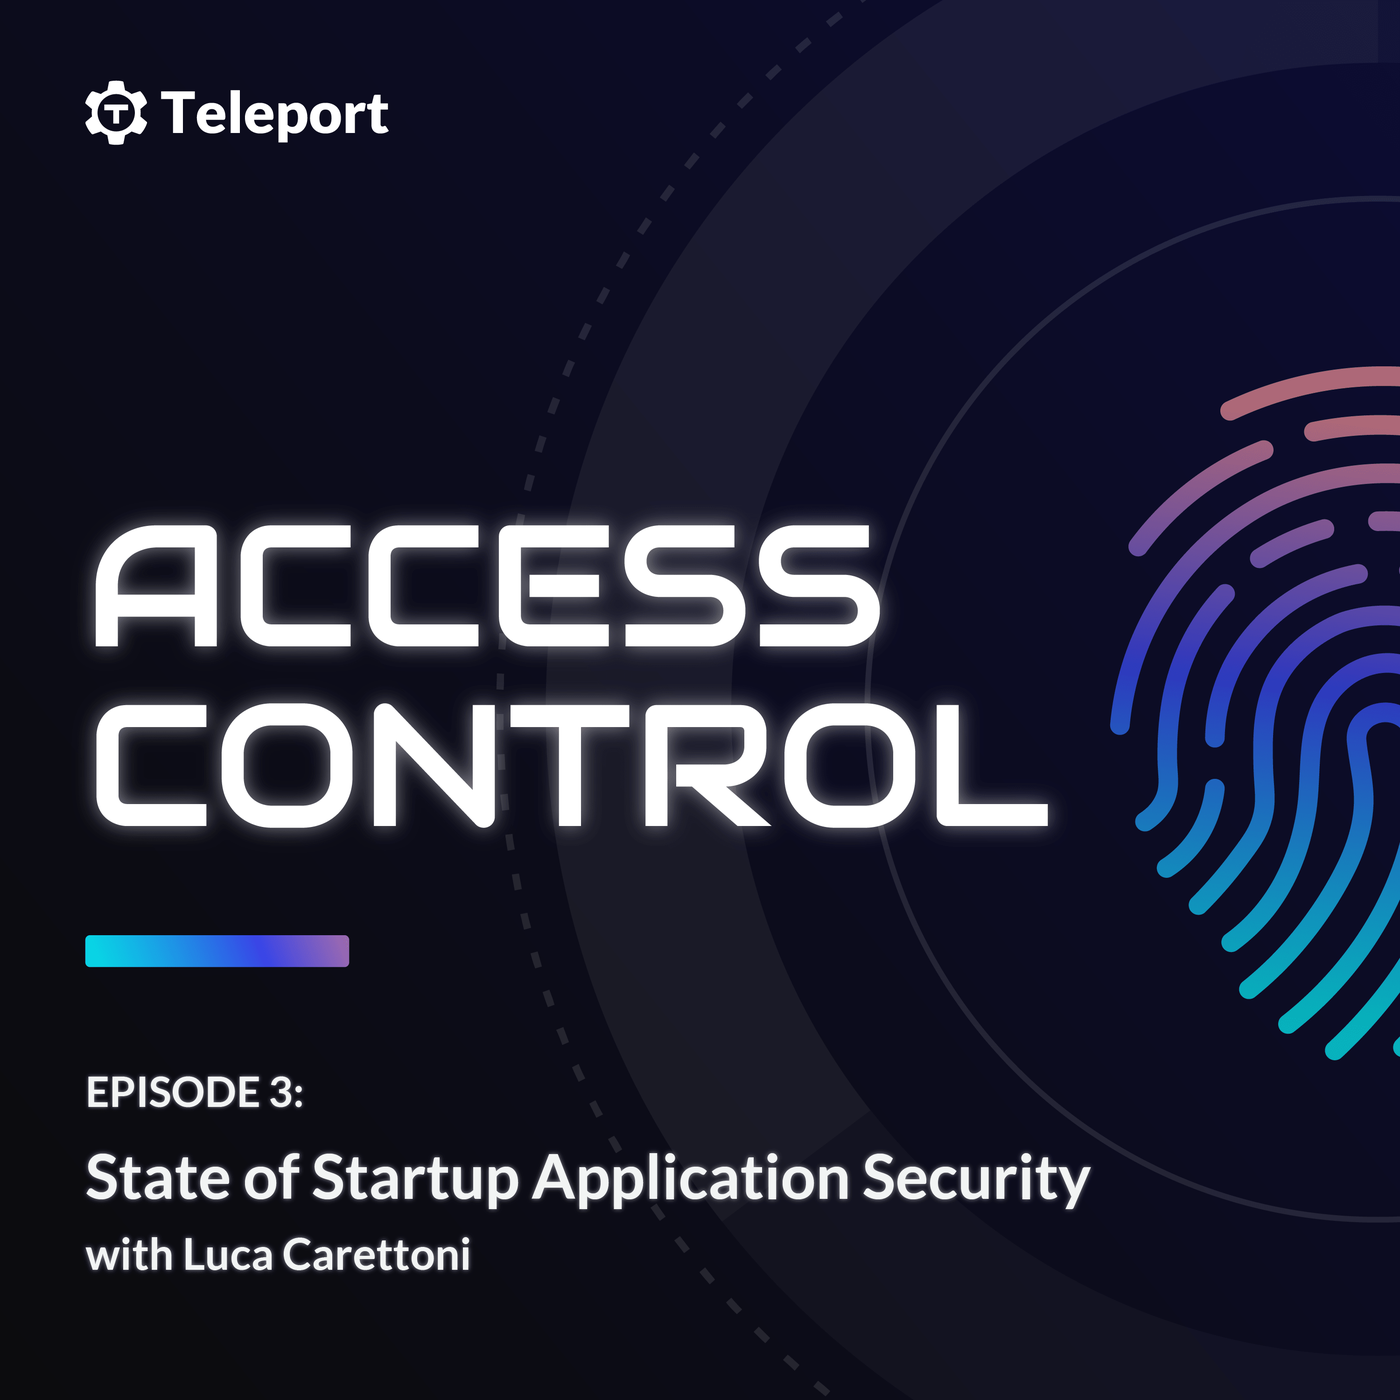 State of Startup Application Security with Luca Carettoni